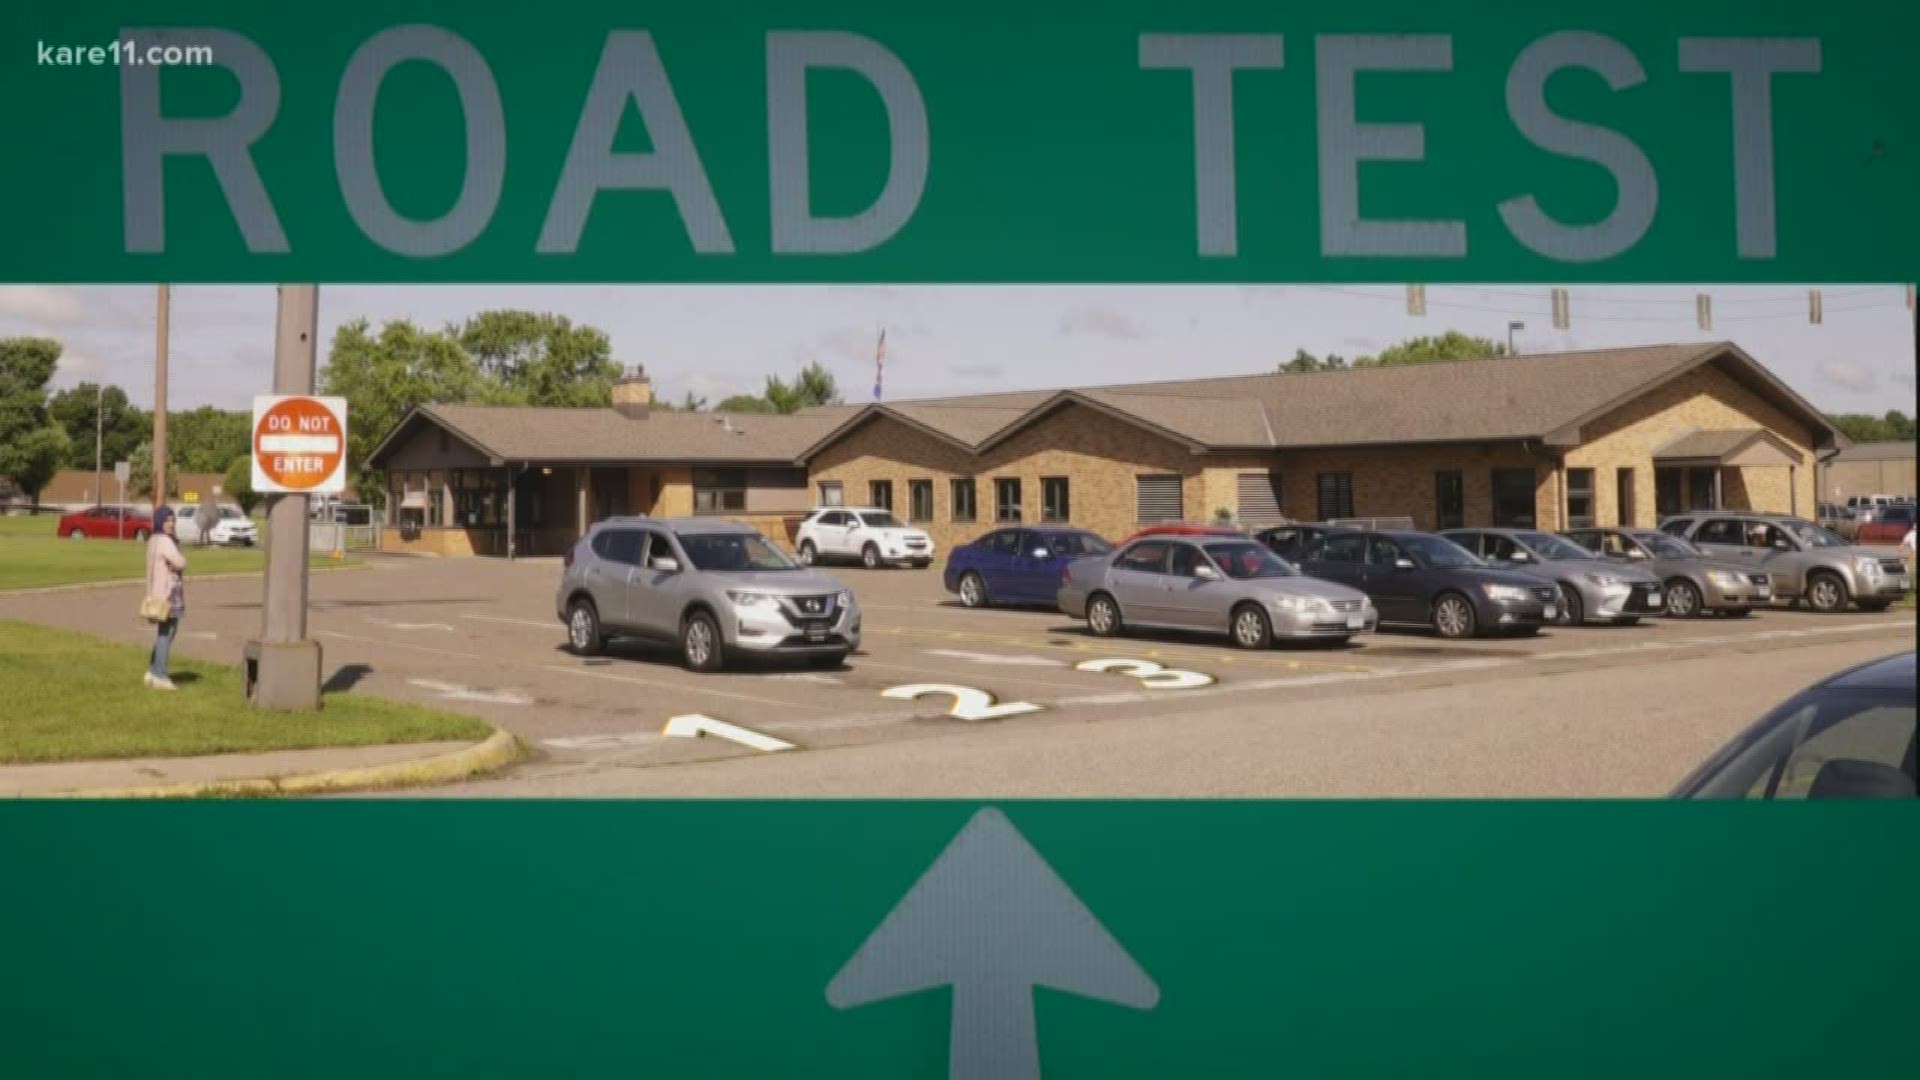 KARE 11 obtained internal records showing state officials dragged their feet getting rid of a system that lets some driving schools sell driving test appointments.